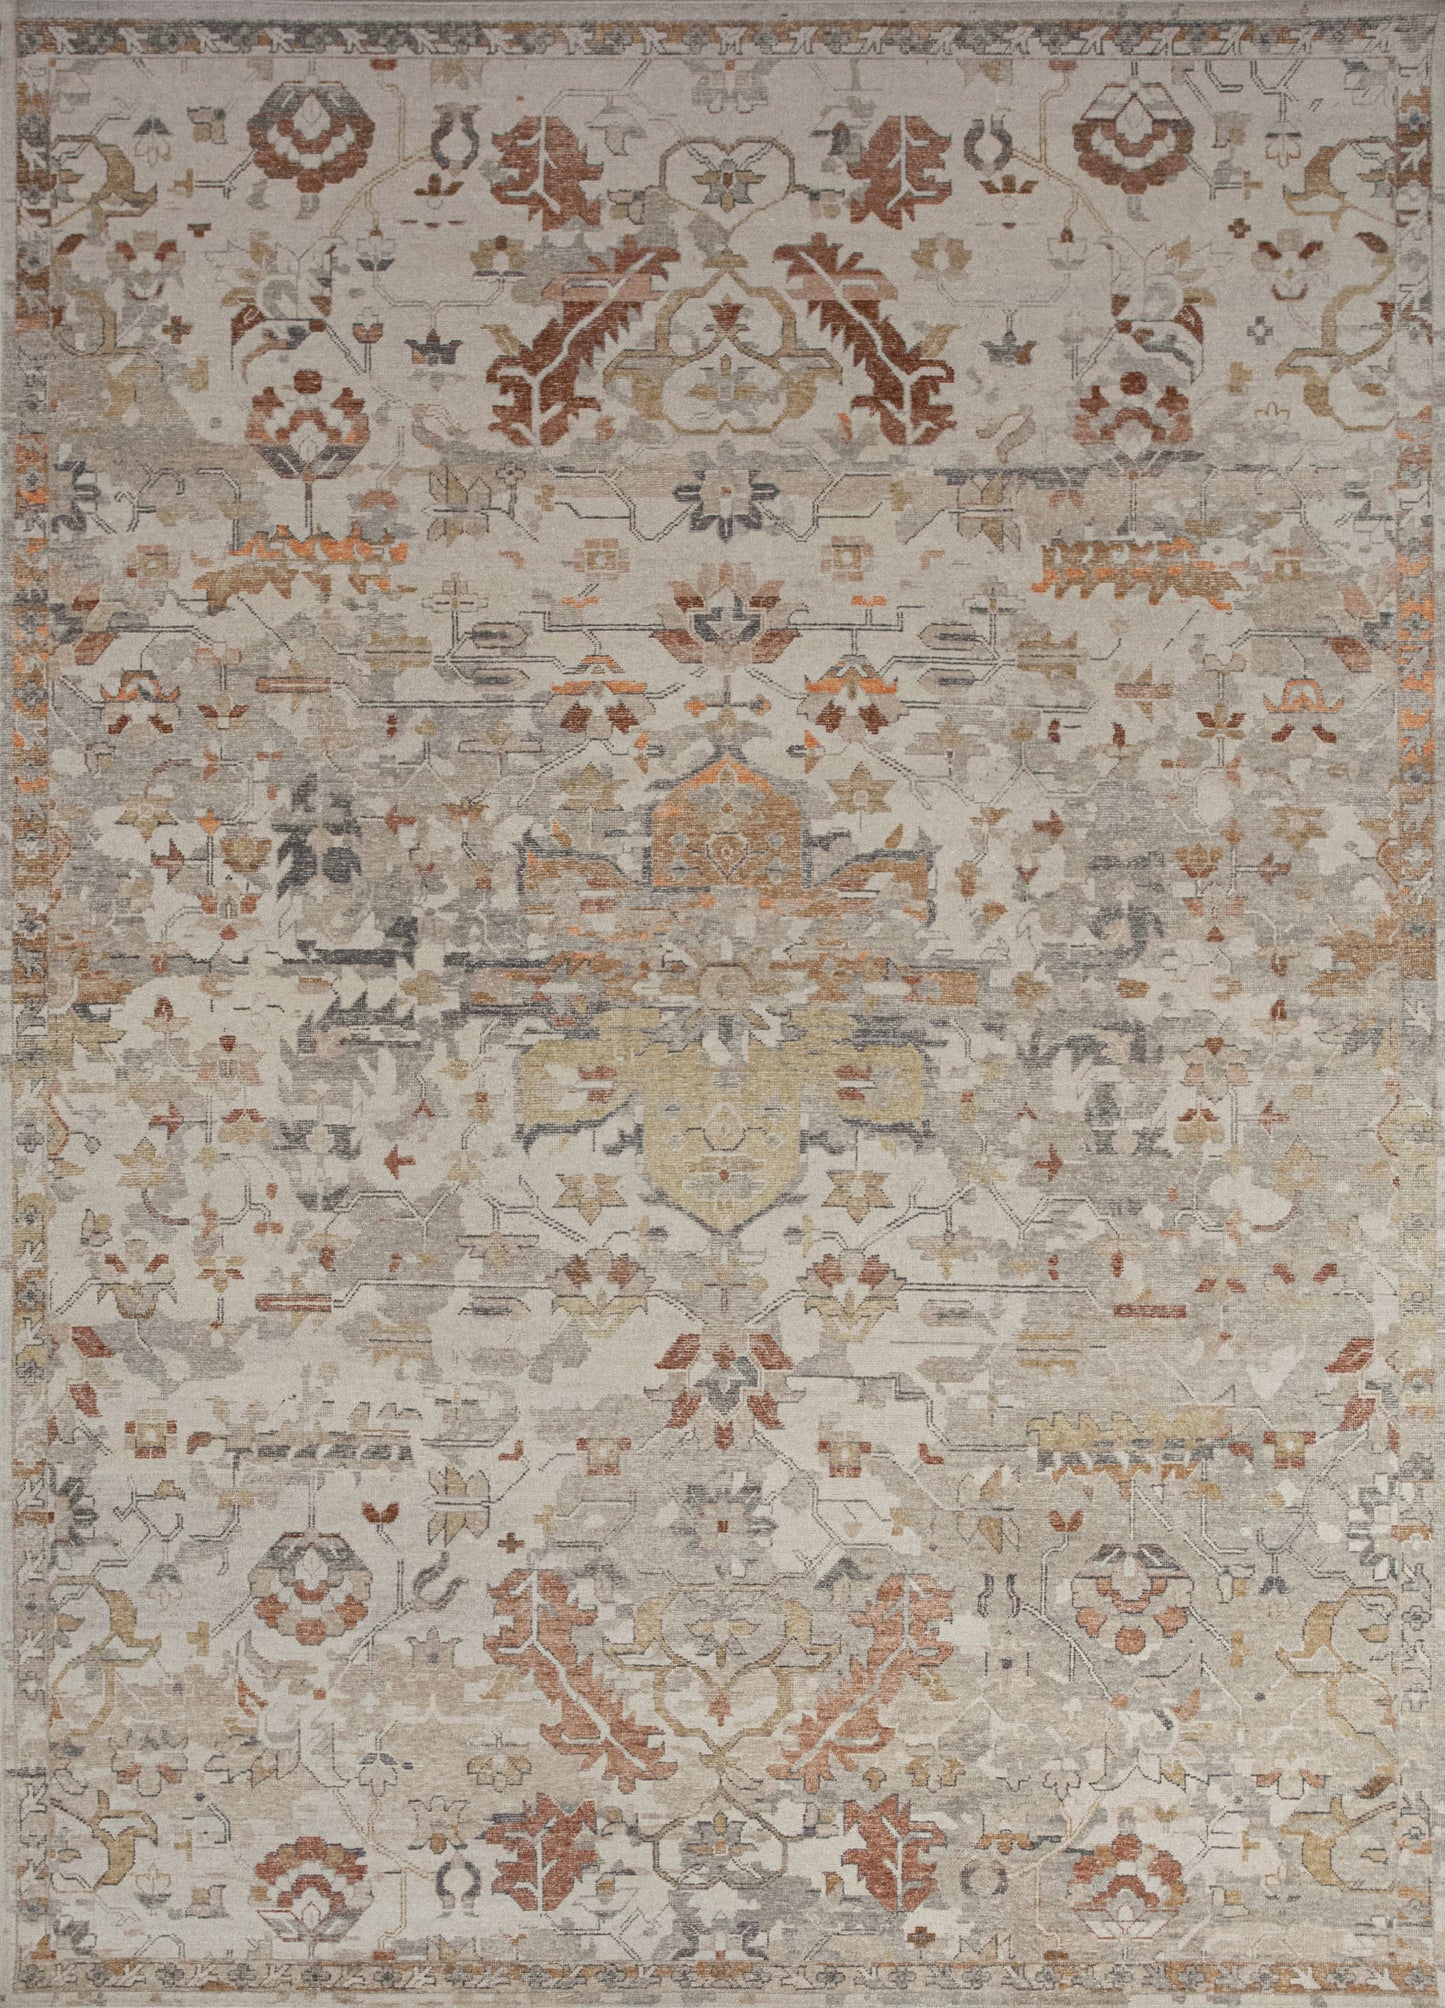 Impressive carpet knitted with the Autumn season's inspiration and beige background. The symmetrical design renders turning leaves, california black oak leaves, and thin branches. 